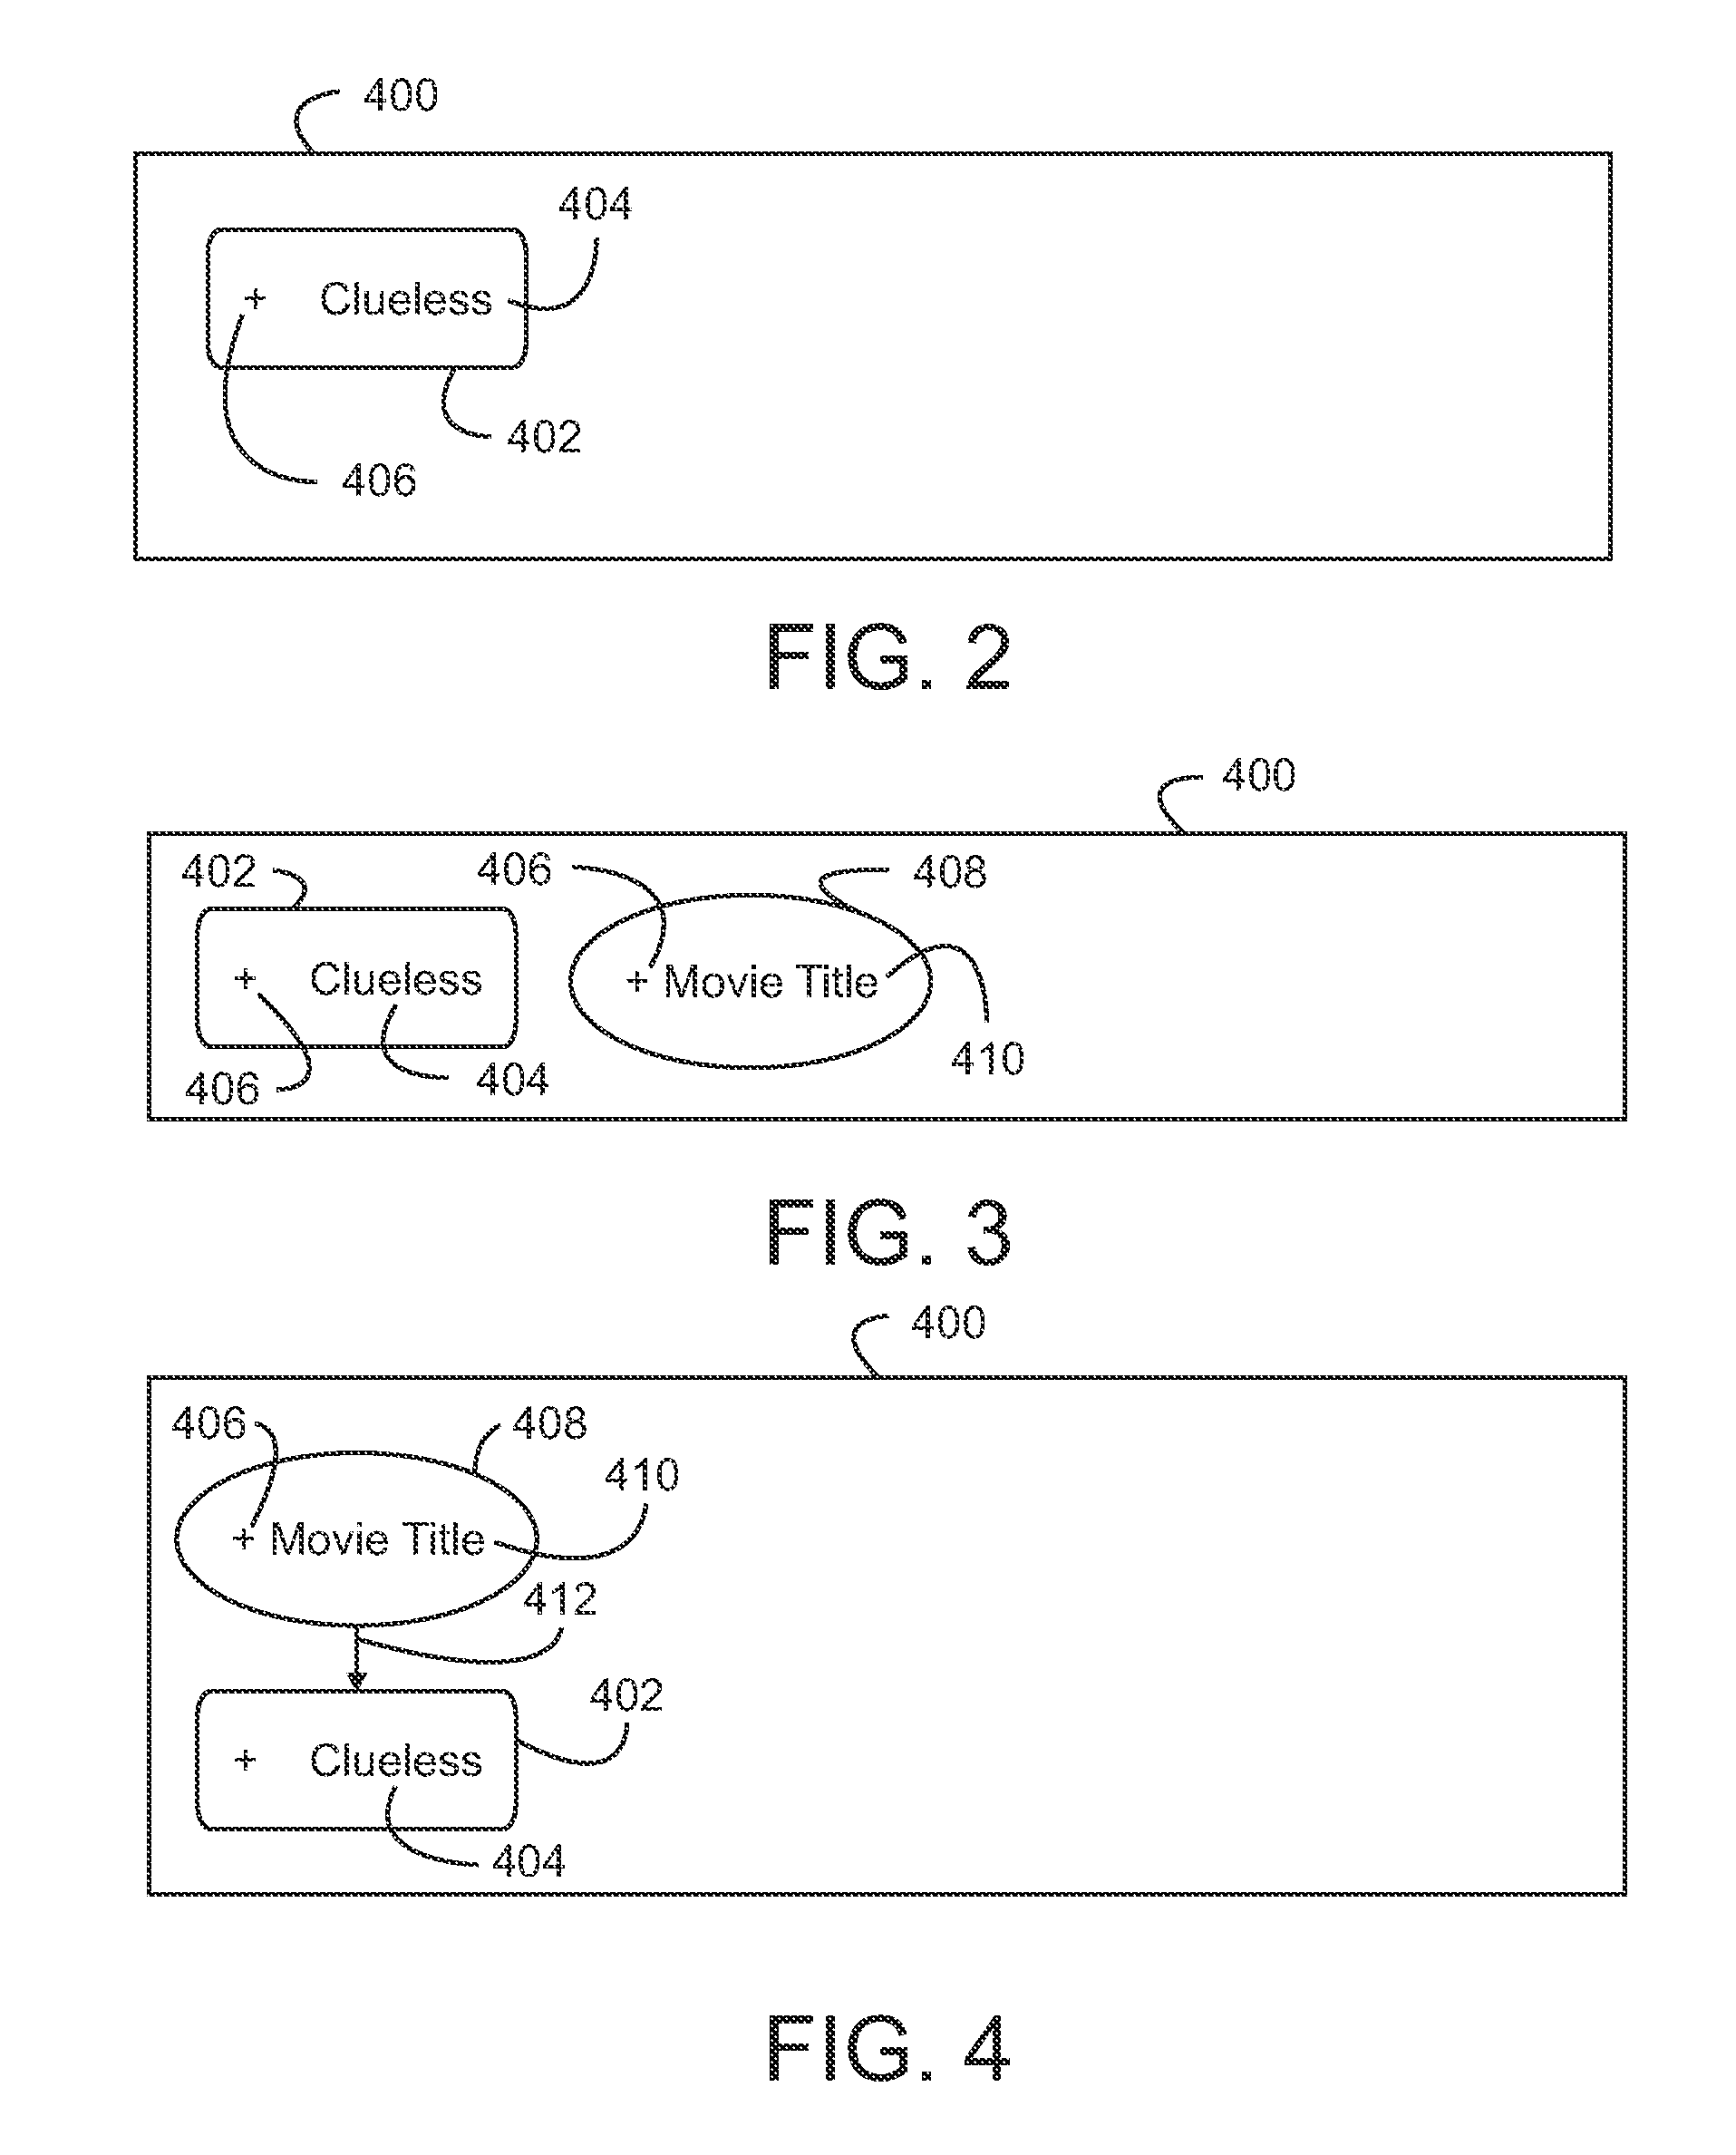 Method and process for semantic or faceted search over unstructured and annotated data